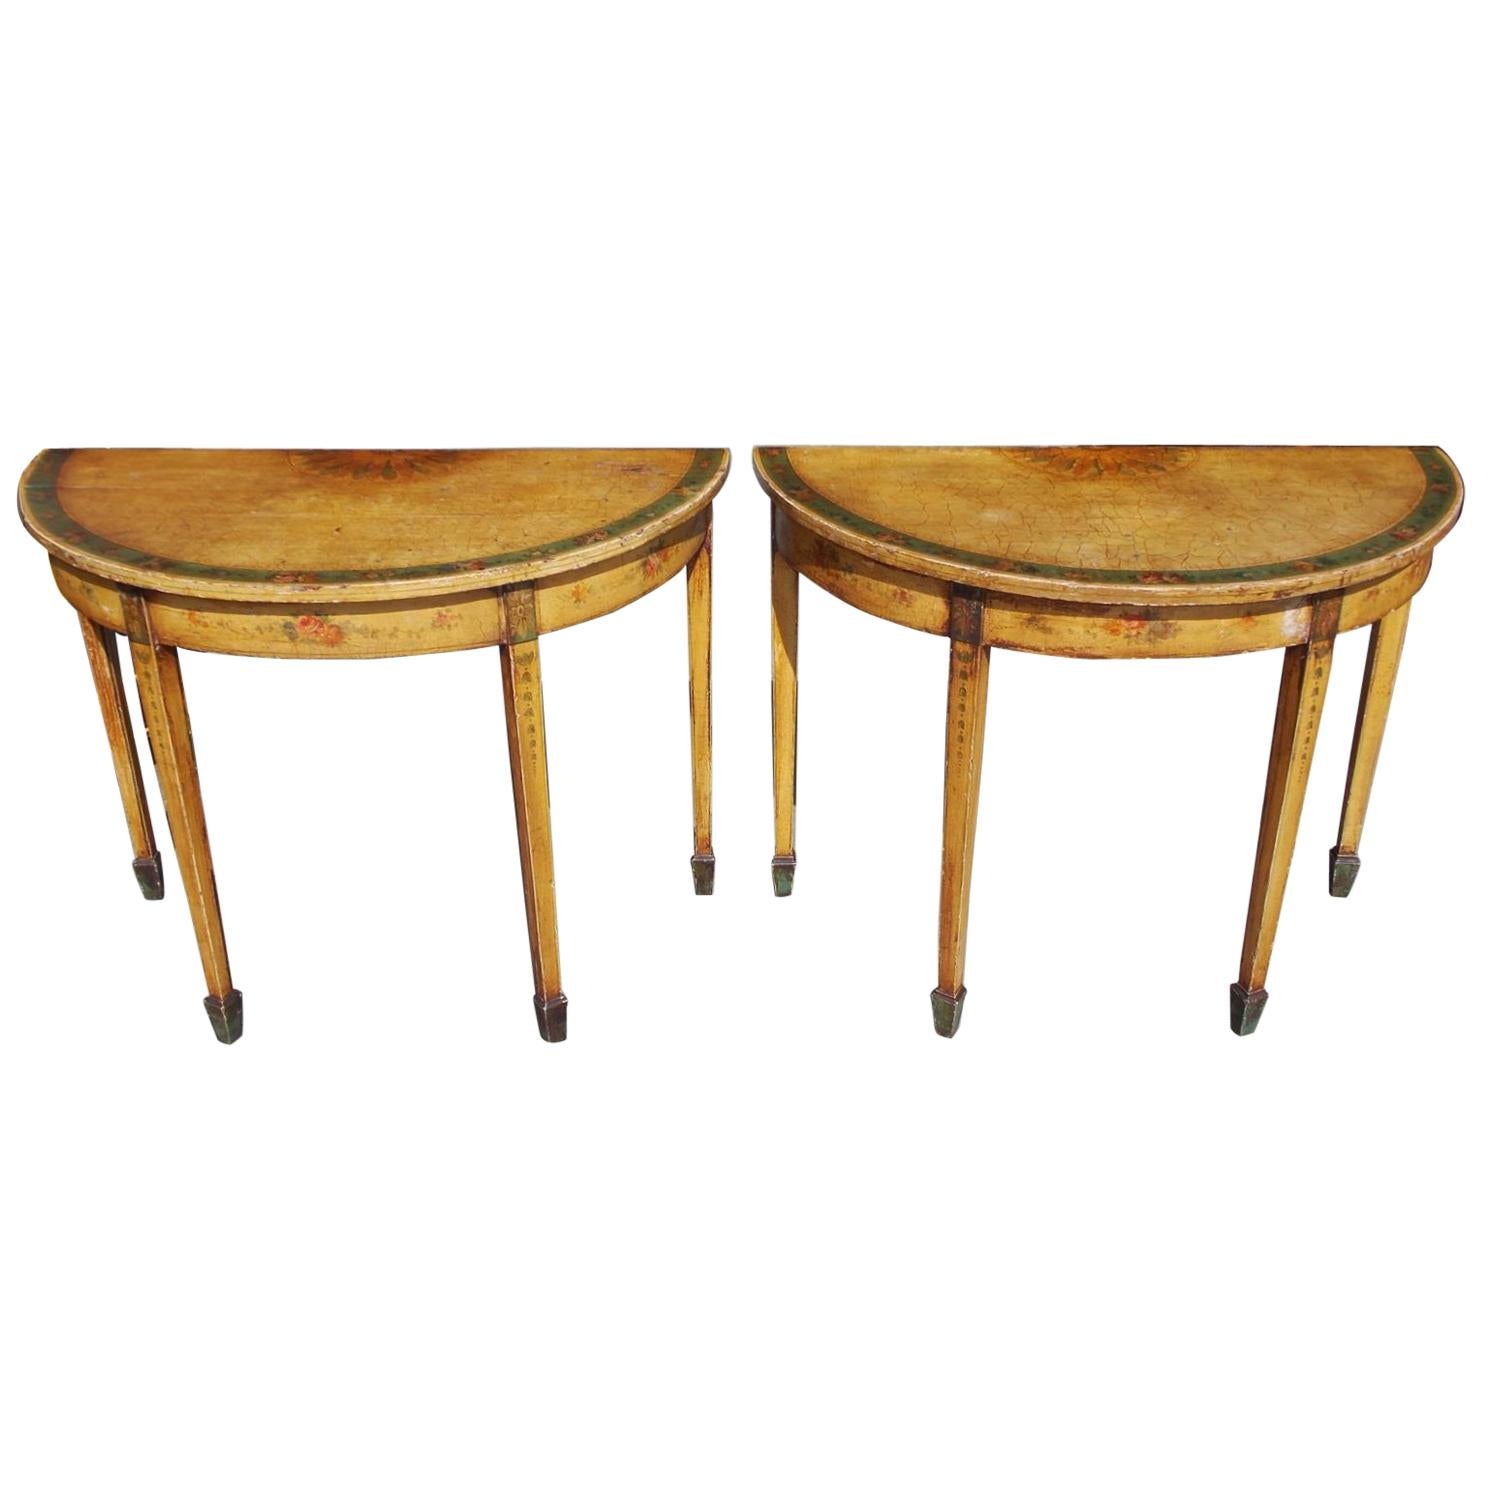 Pair of Italian Demi-Lune Painted Floral Consoles with Spade Feet, Circa 1830